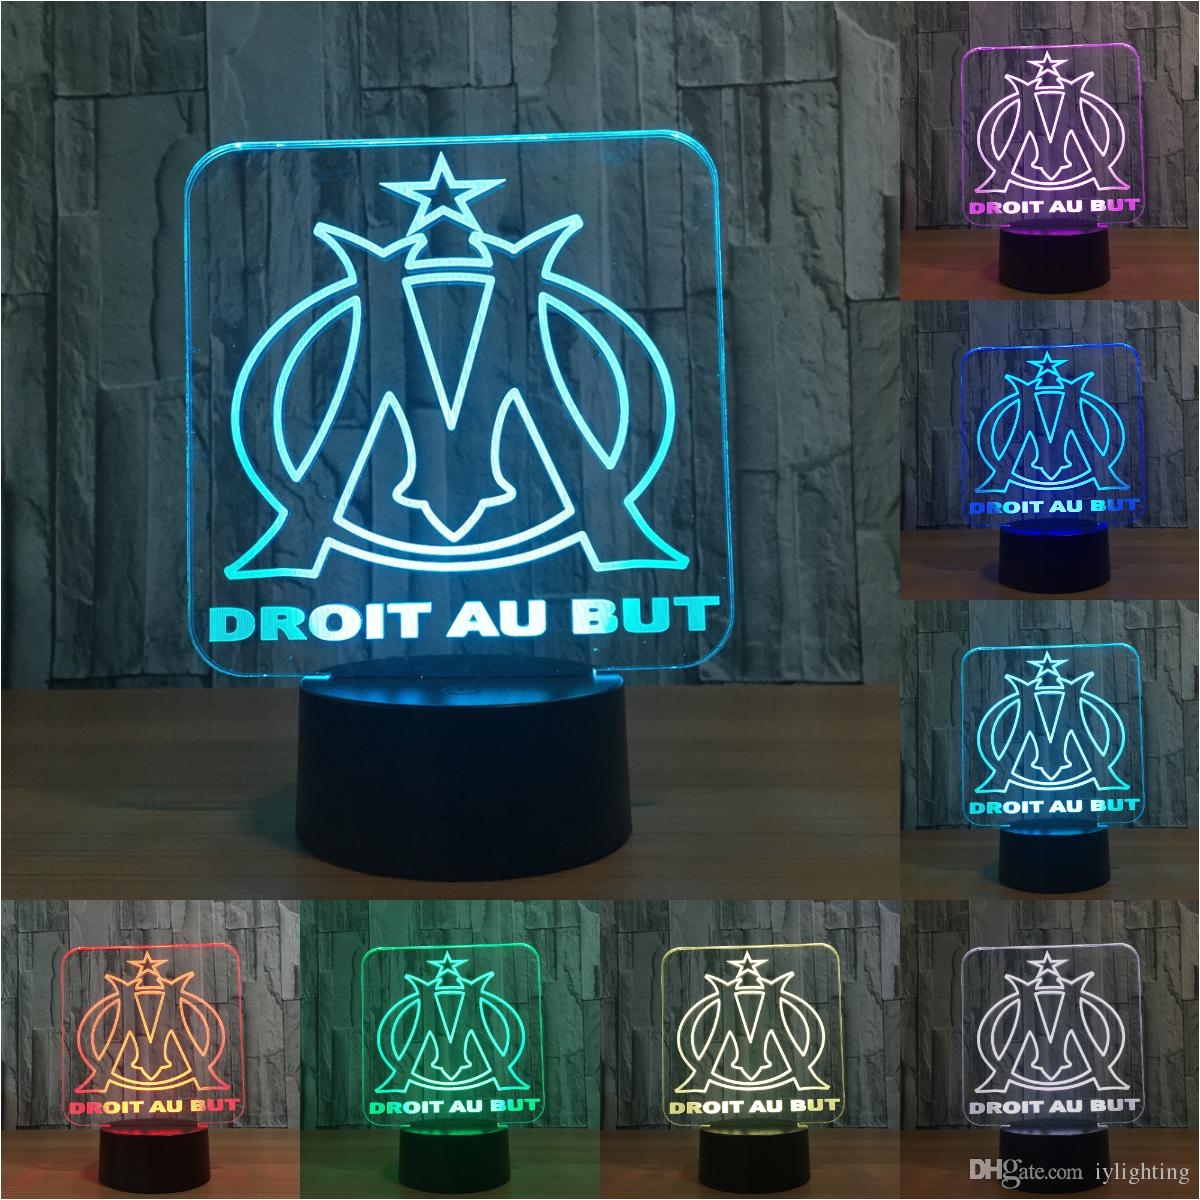 3d lamp droit au but night light 3d illusion table lamp nightlight changing luminaria touch lights iy803001 3d night light 3d light lamp decor light online